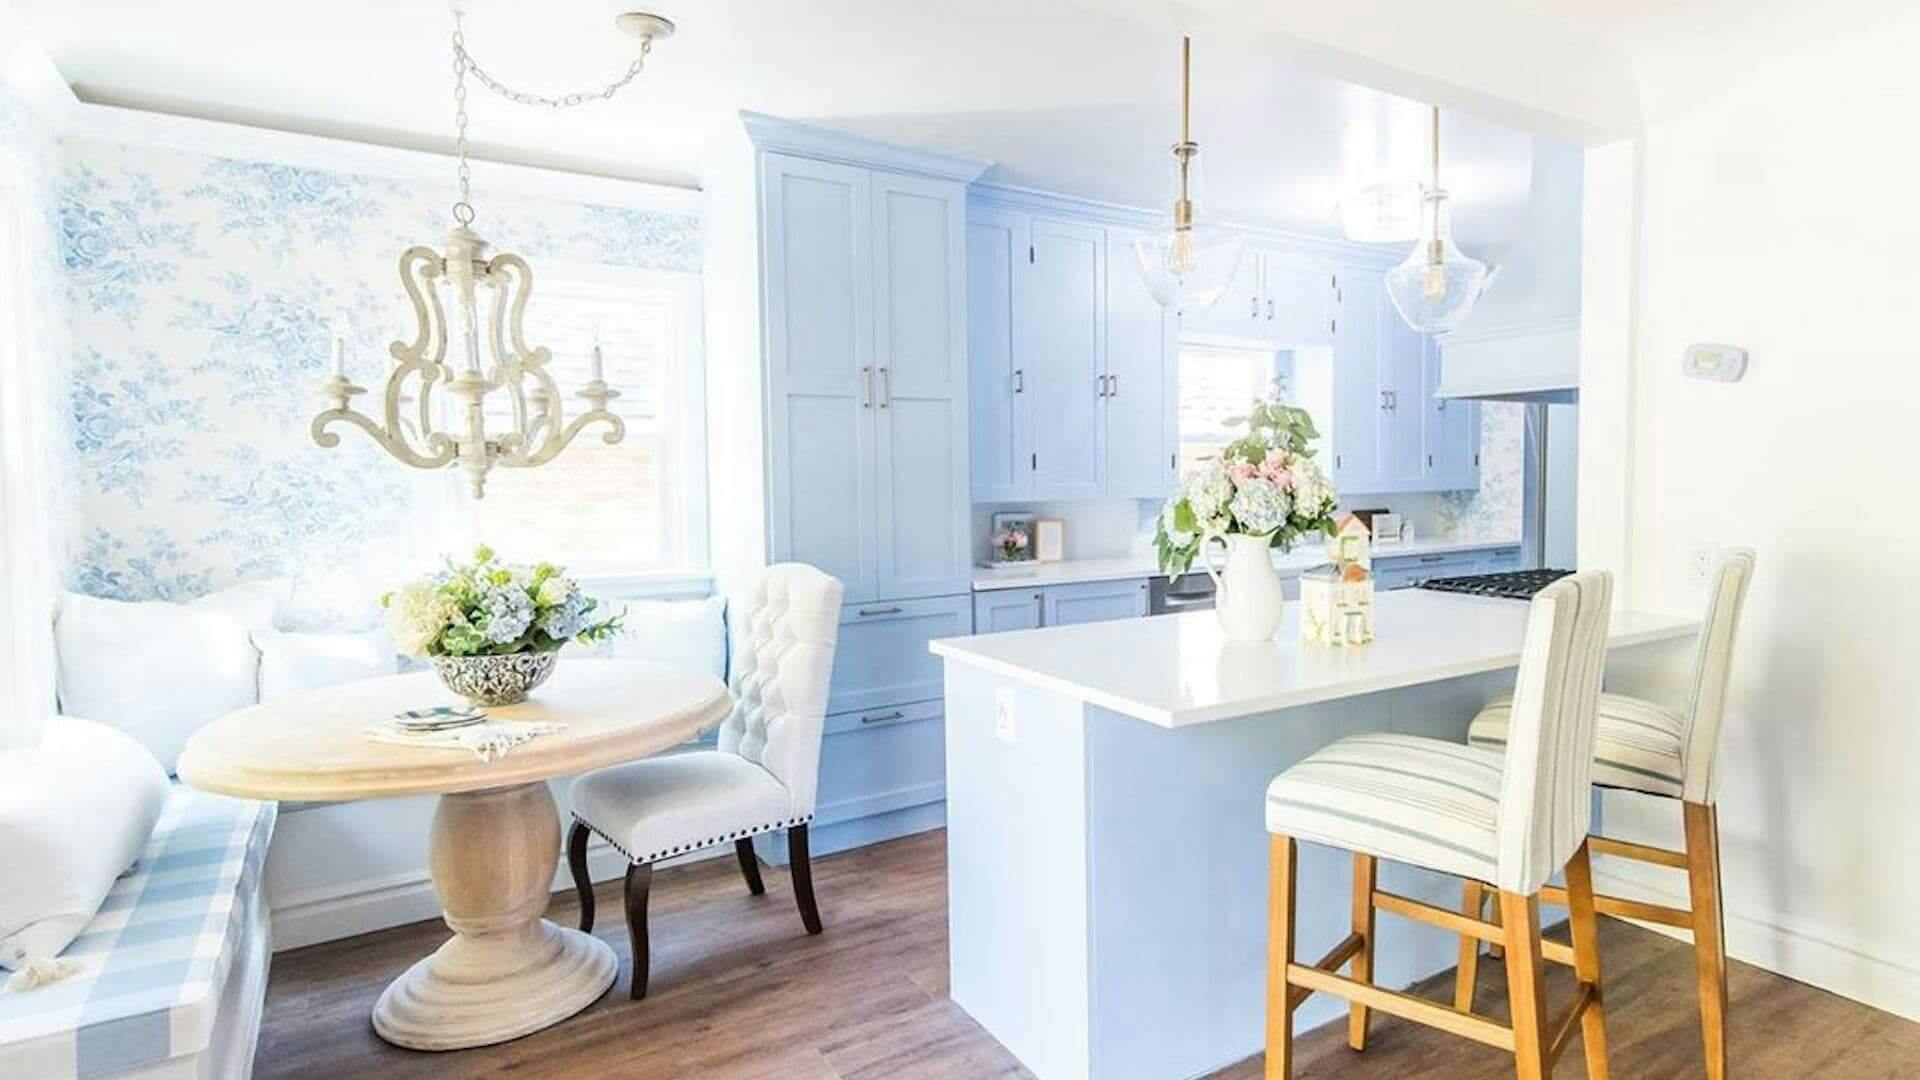 Powder blue kitchen and breakfast nook with variety of pendant and chandeliers